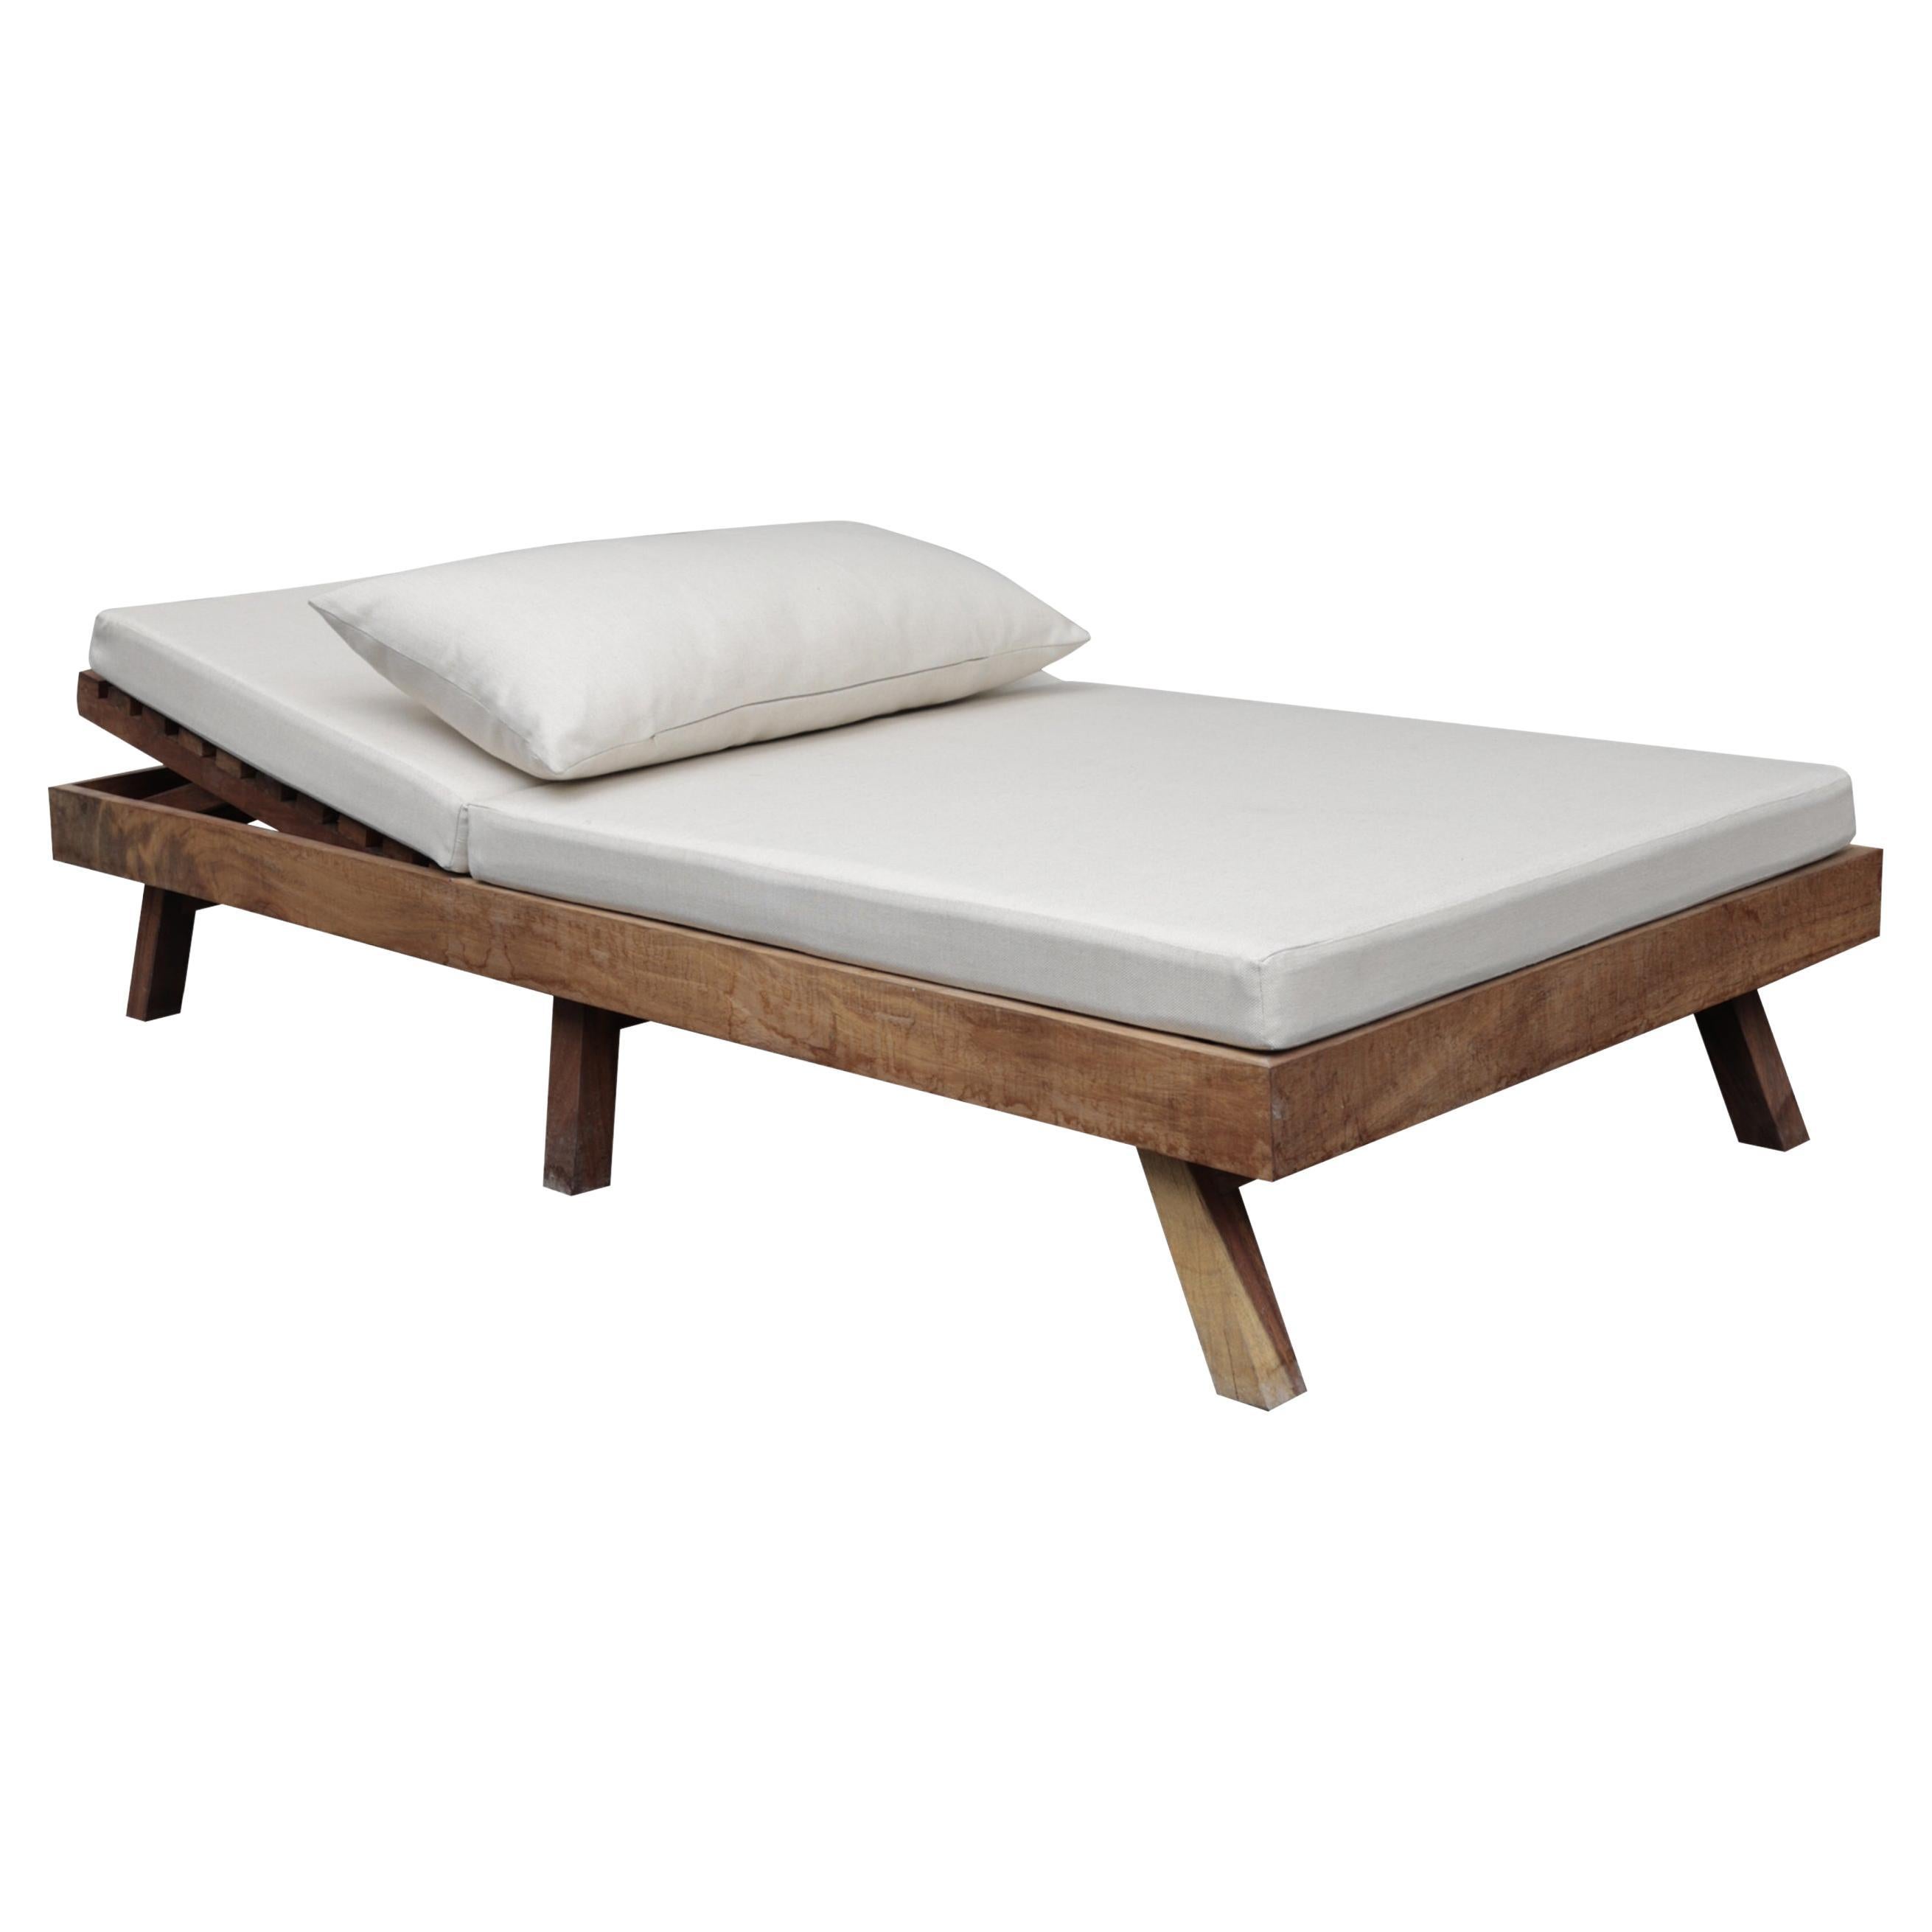 Playamar Huanacaxtle Lounger For Sale